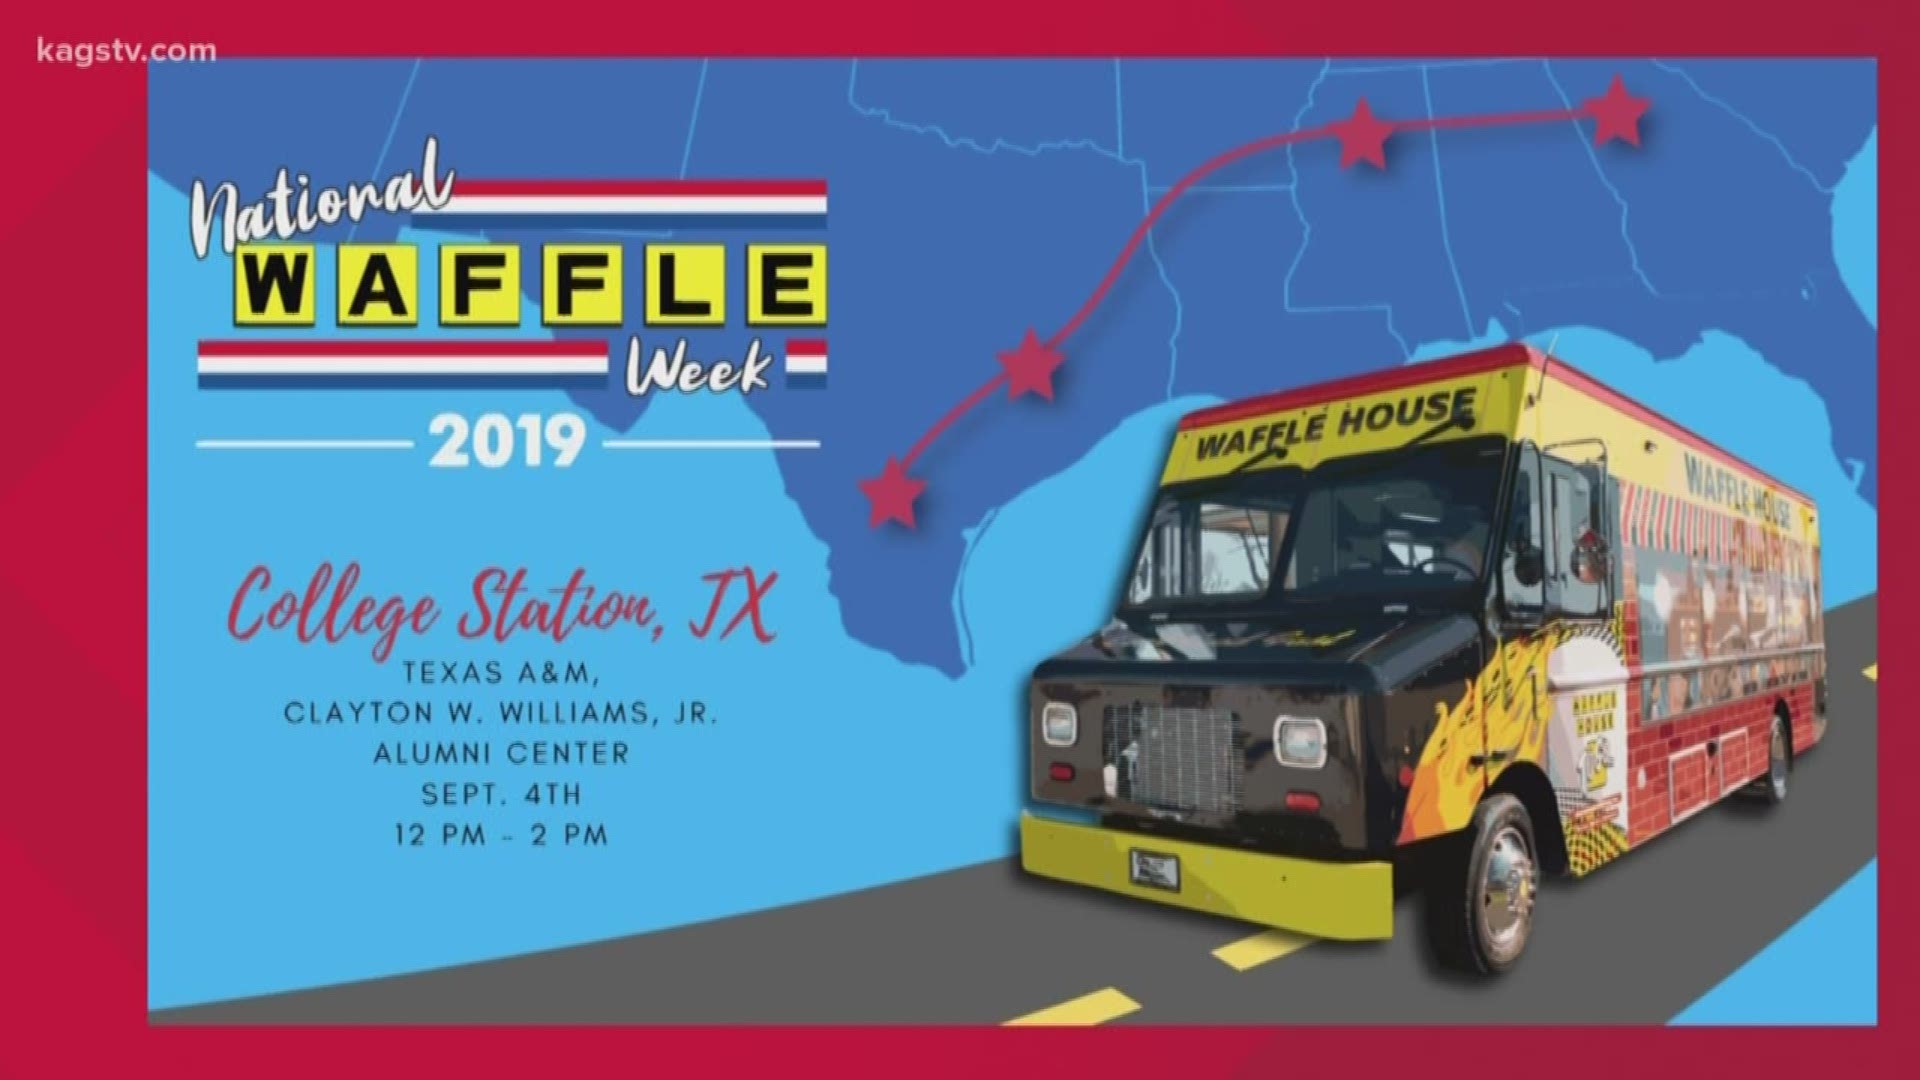 College Station won the Waffle House poll by 44 percent.